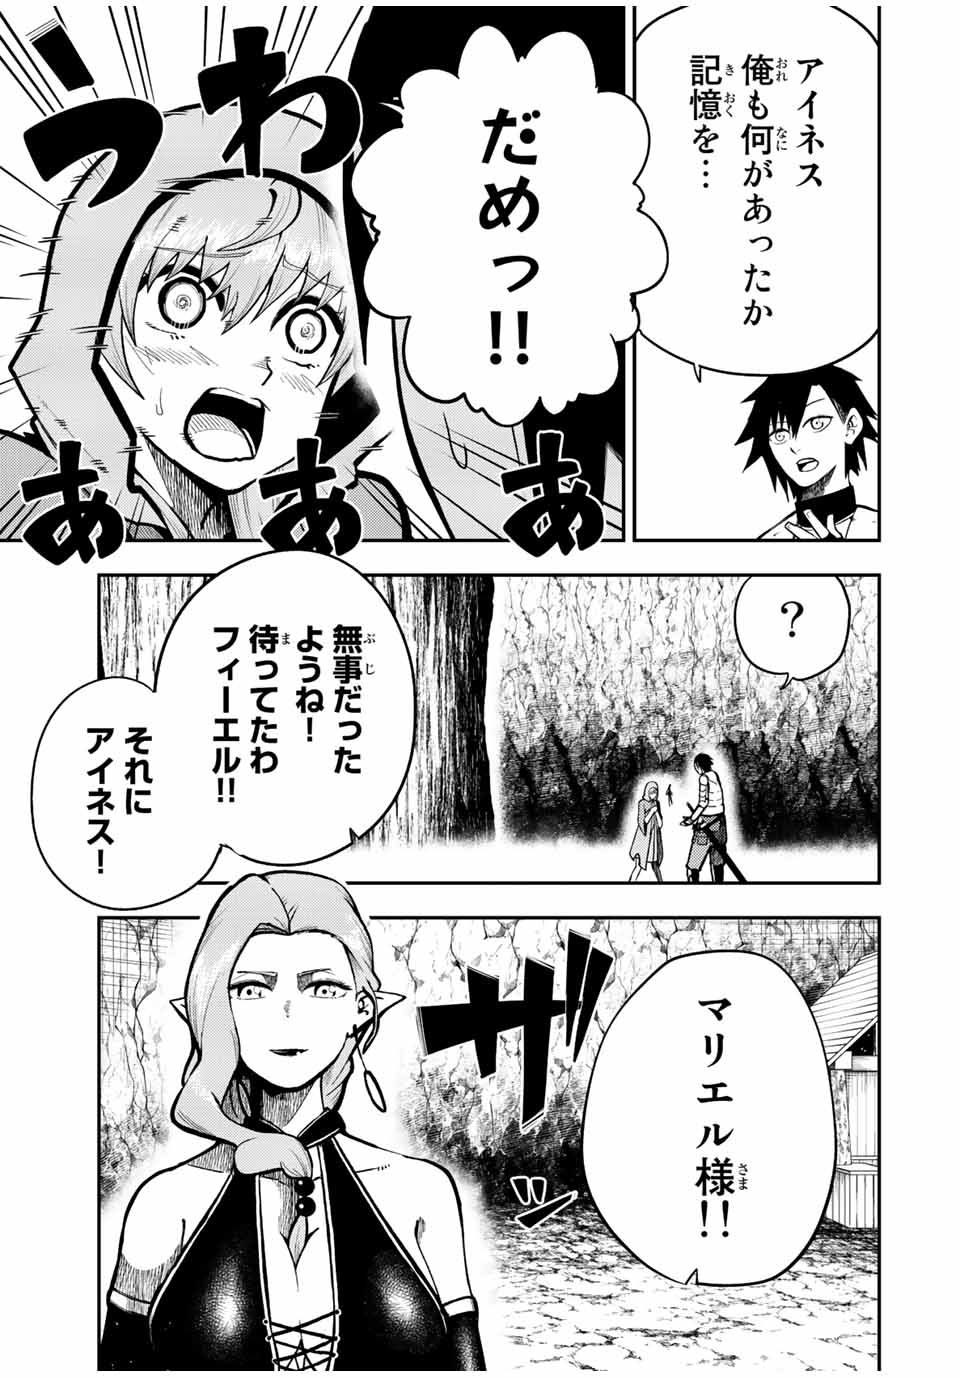 the strongest former prince-; 奴隷転生 ～その奴隷、最強の元王子につき～ 第78話 - Page 5